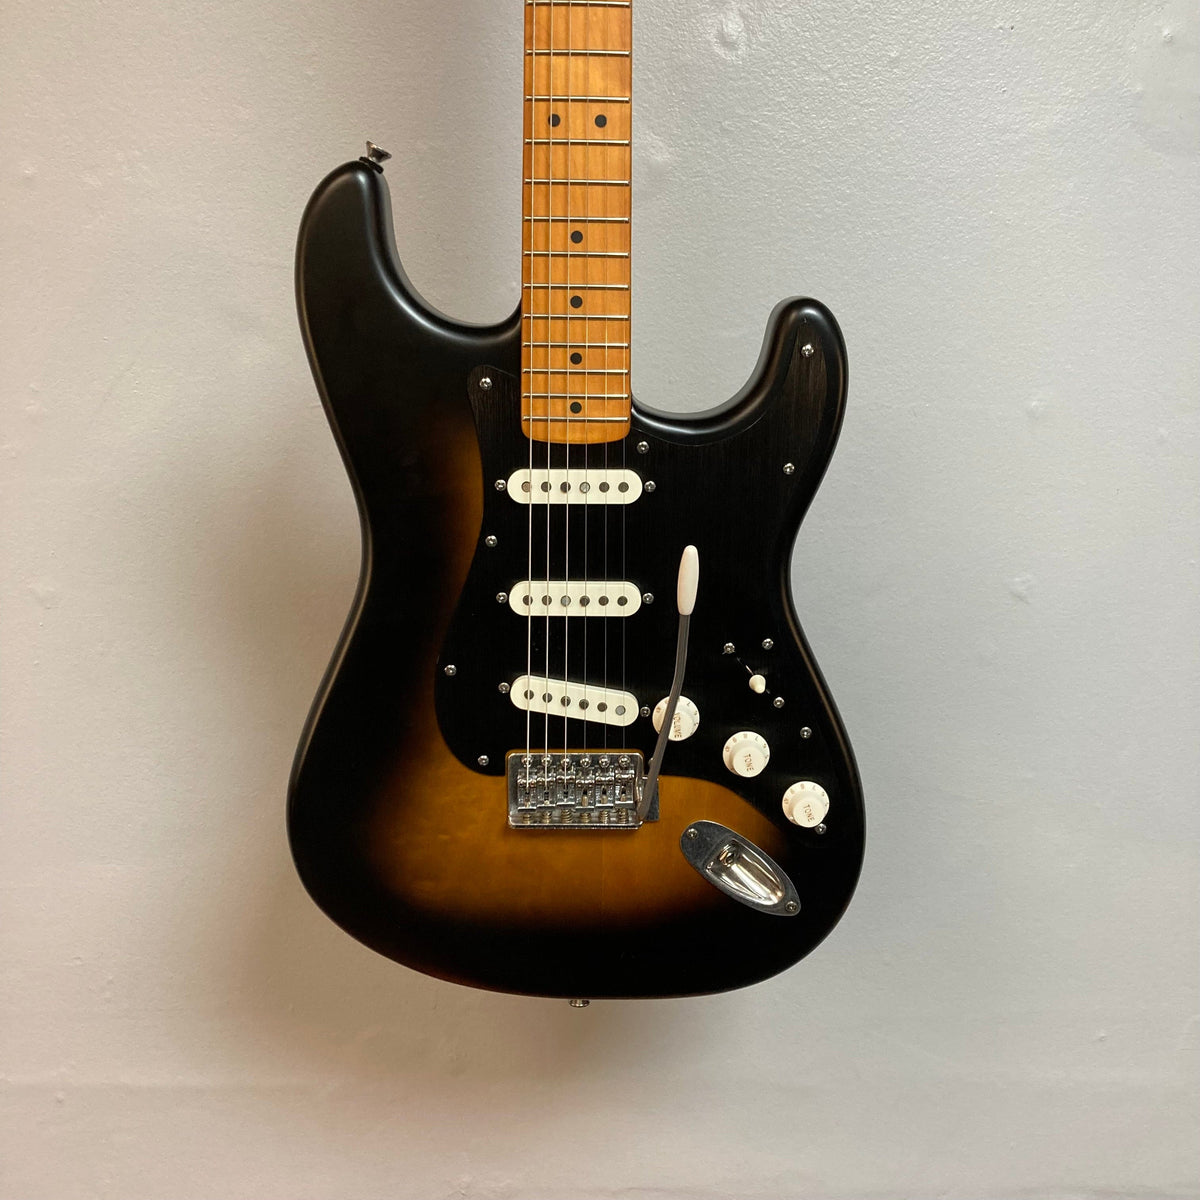 Squier 40th Anniversary Stratocaster Vintage Edition...